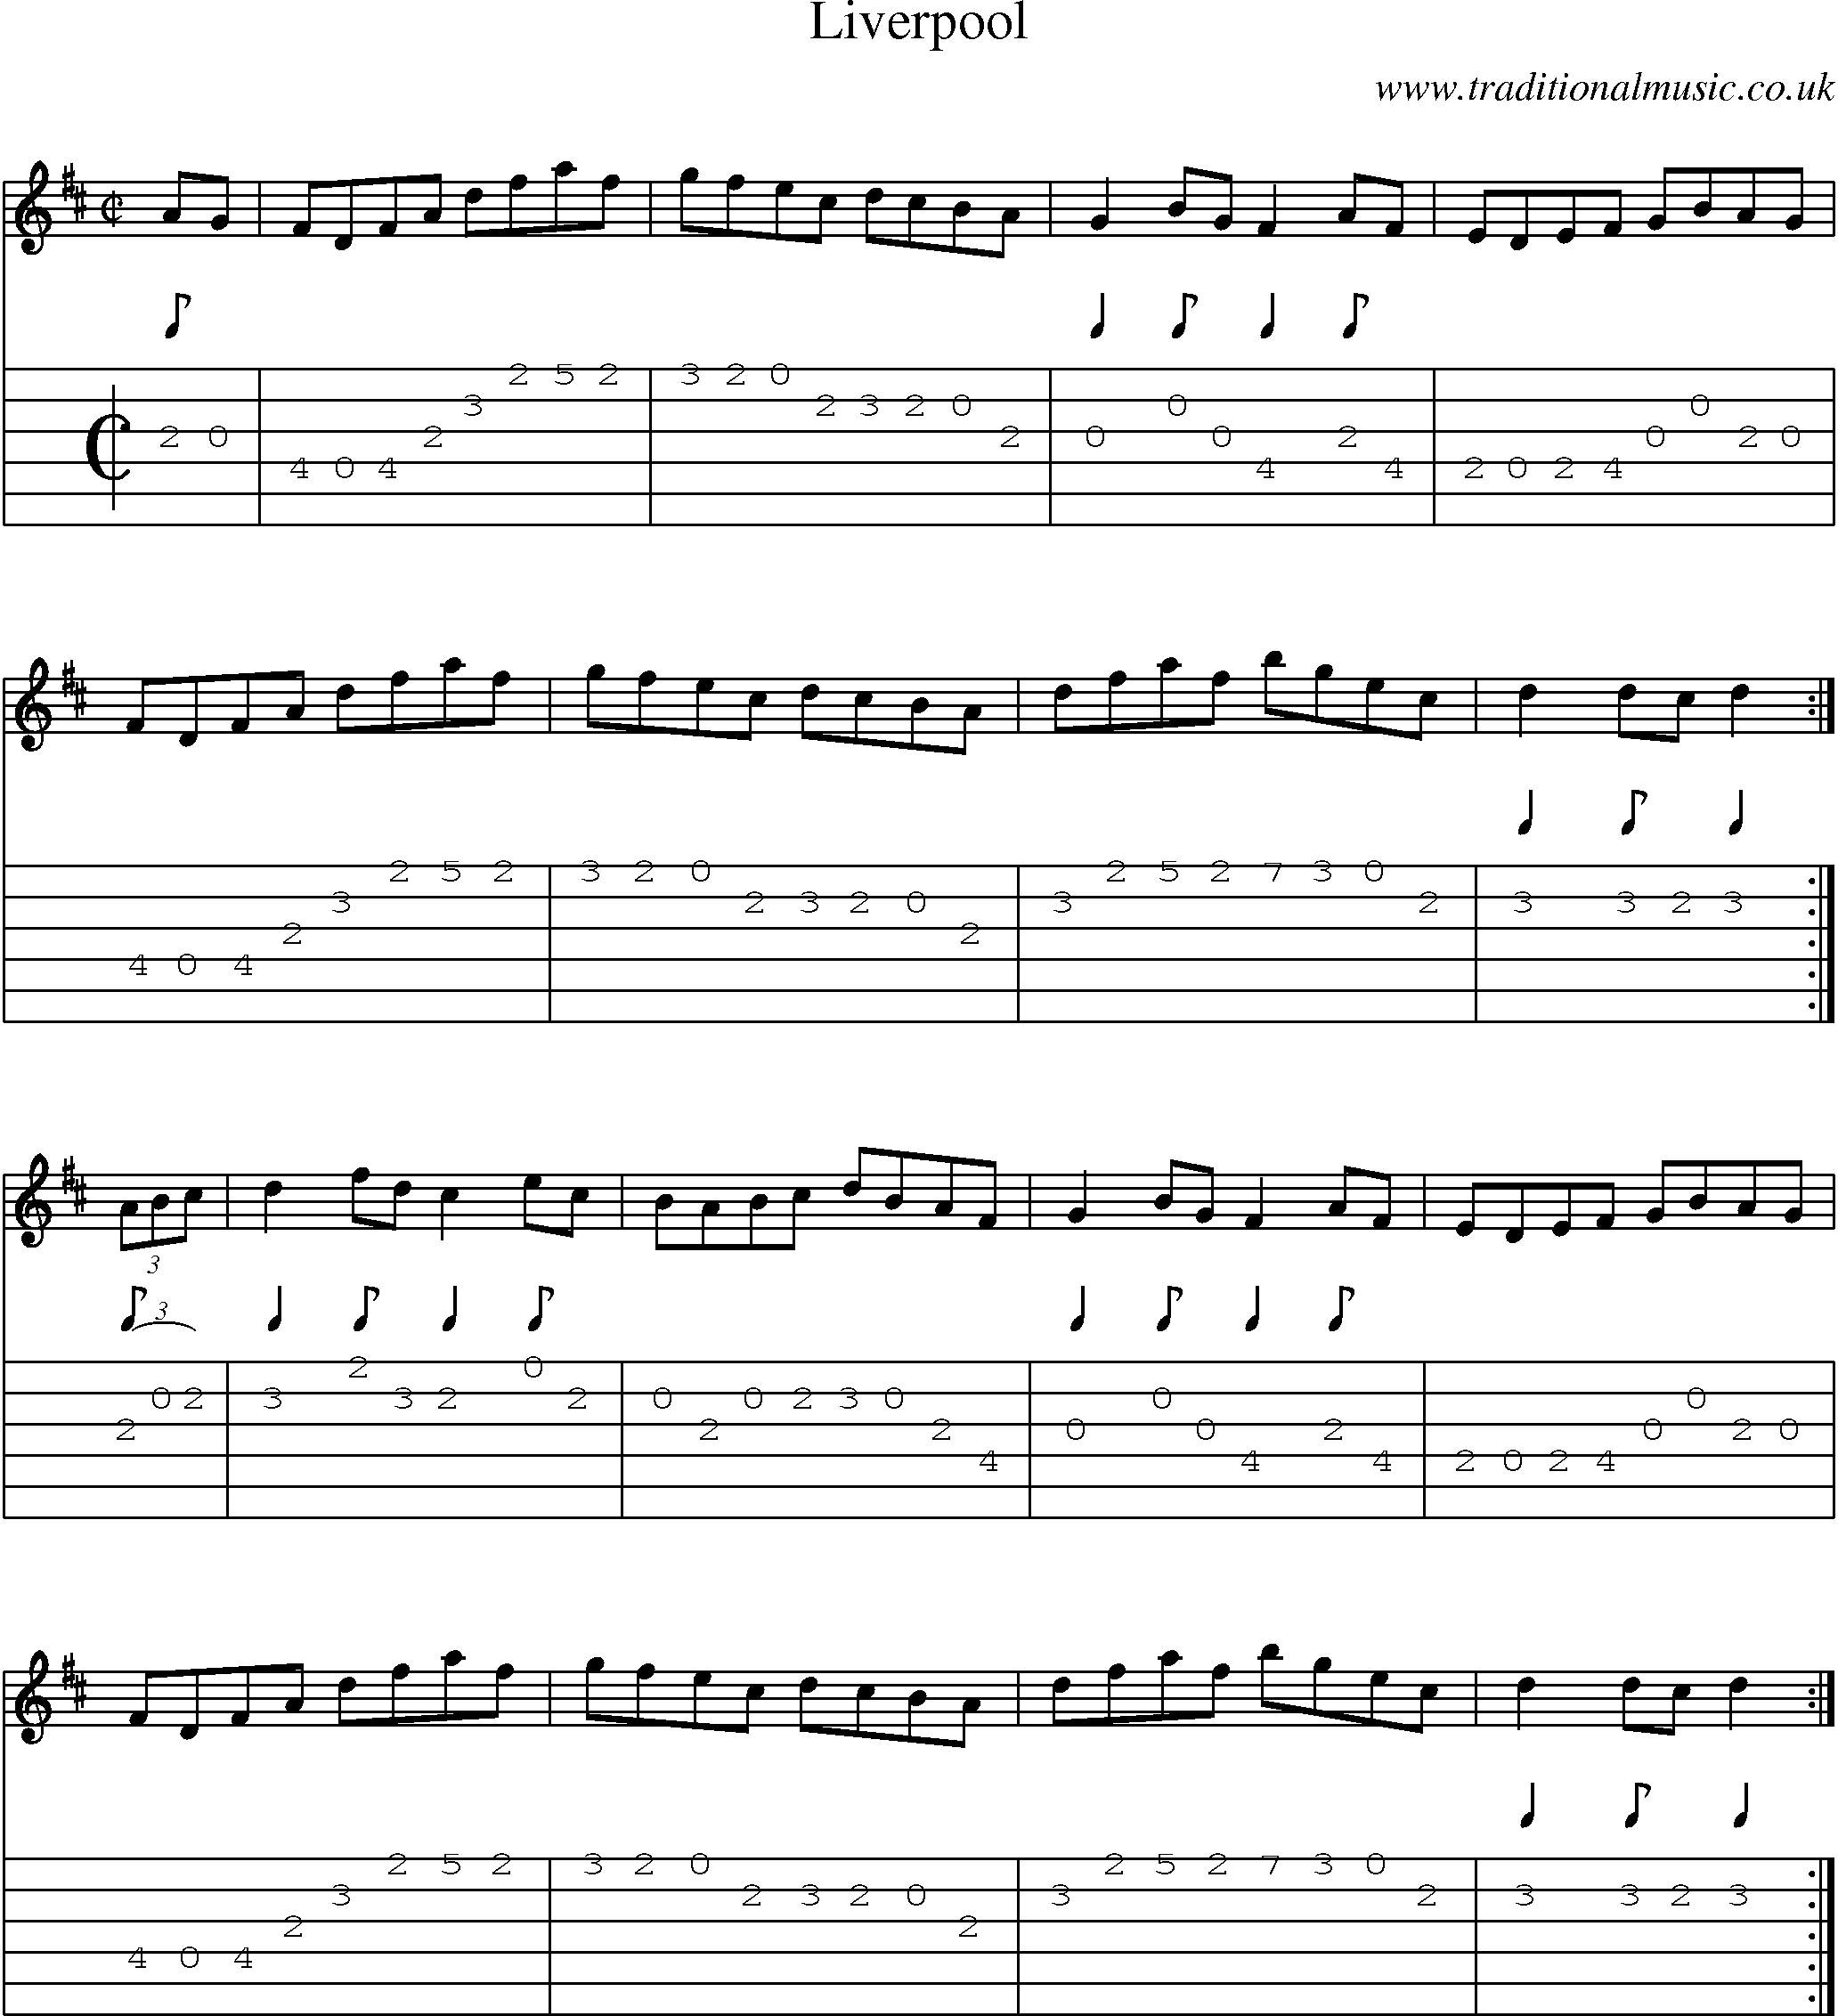 Music Score and Guitar Tabs for Liverpool